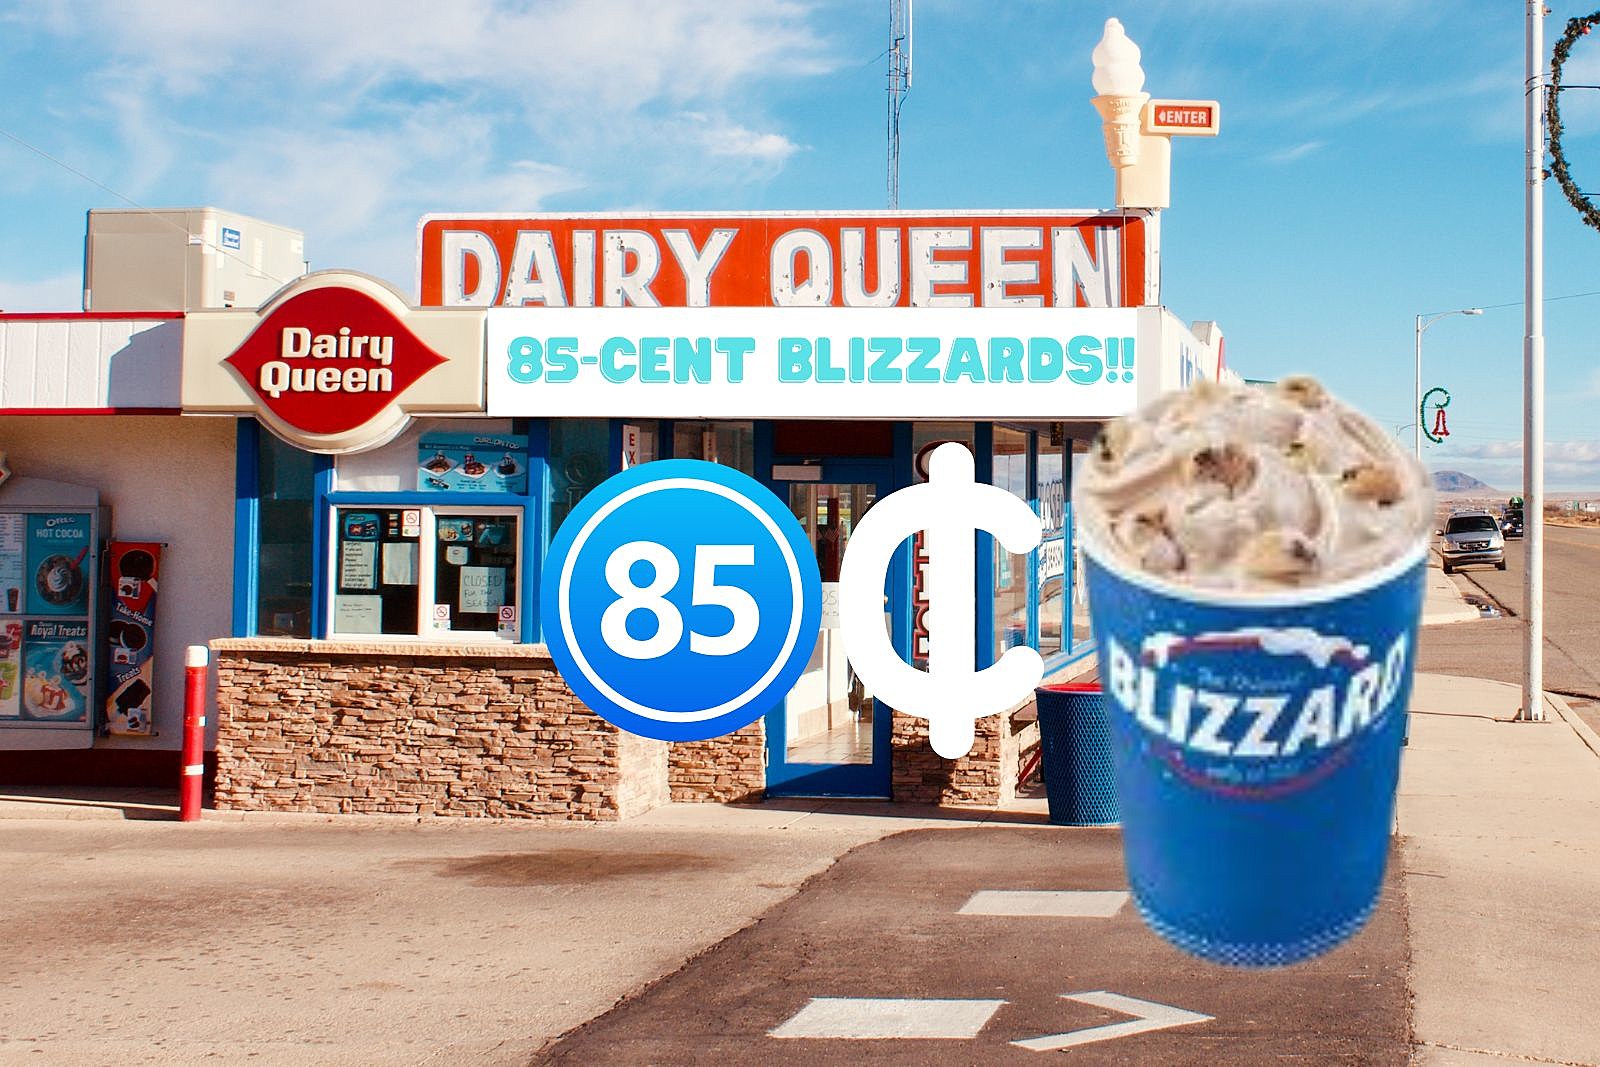 Dairy Queen - Back seats were made for treats